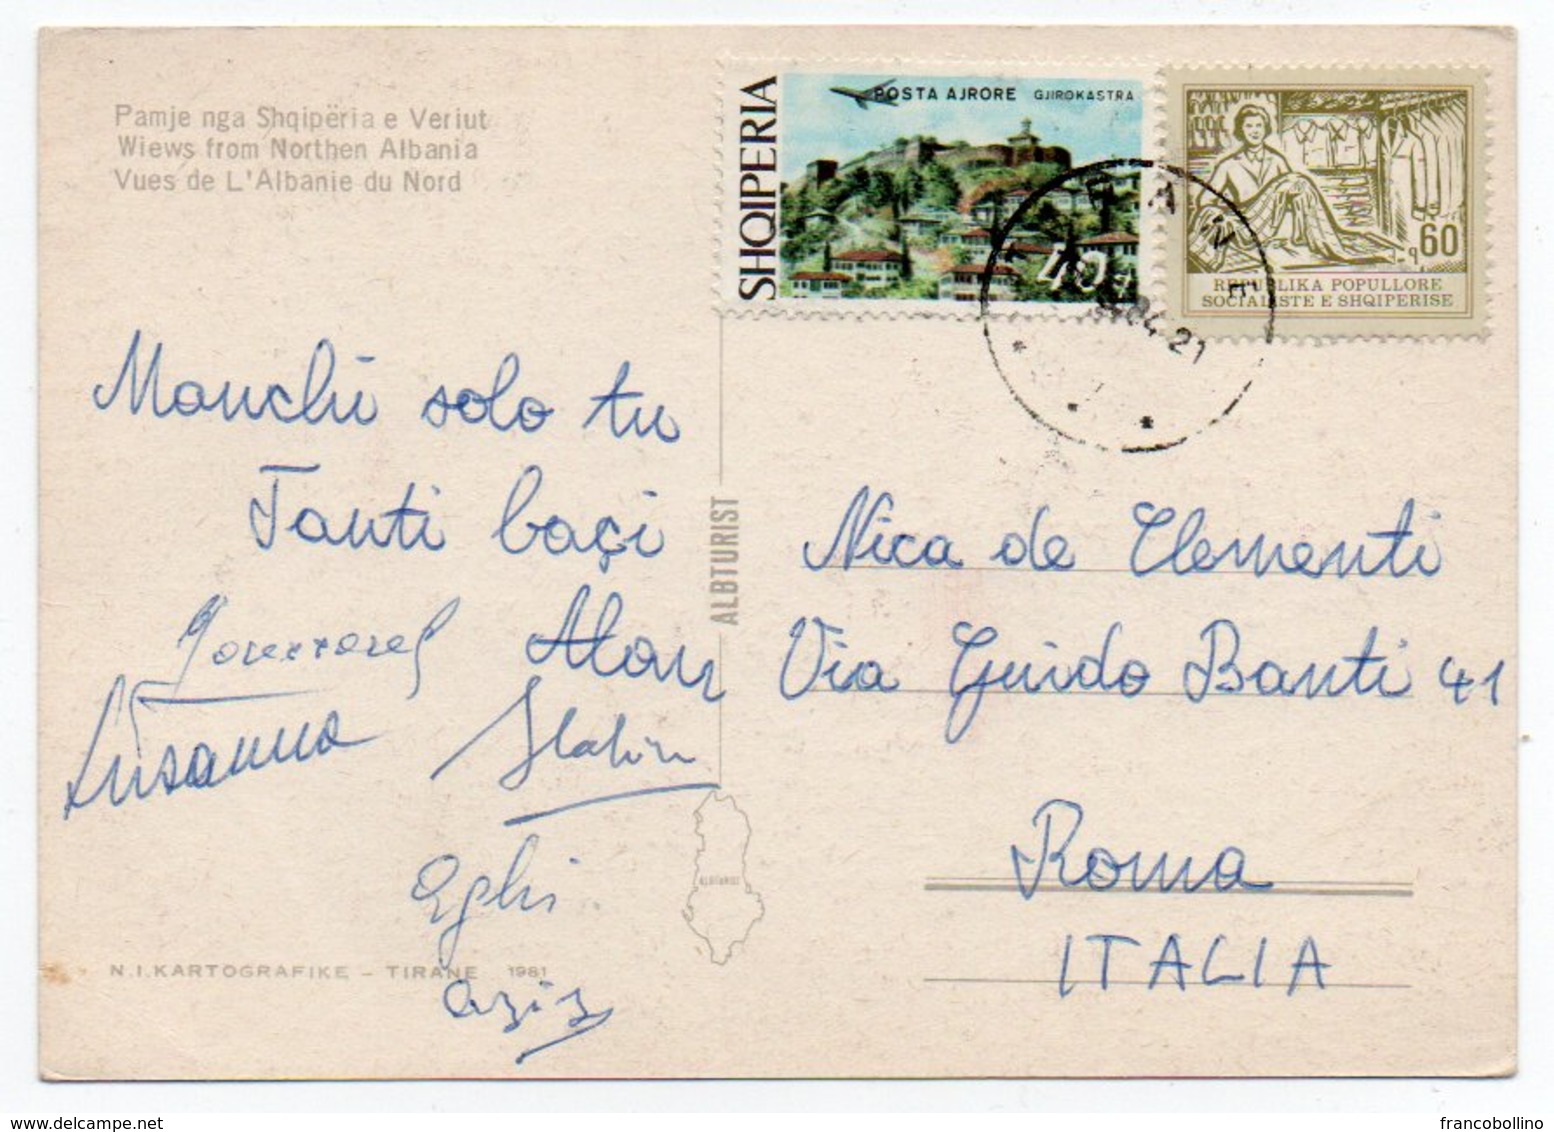 ALBANIA/SHQIPERIA - VIEWS FROM NORTHERN ALBANIA / THEMATIC AIR MAIL STAMP - Albania